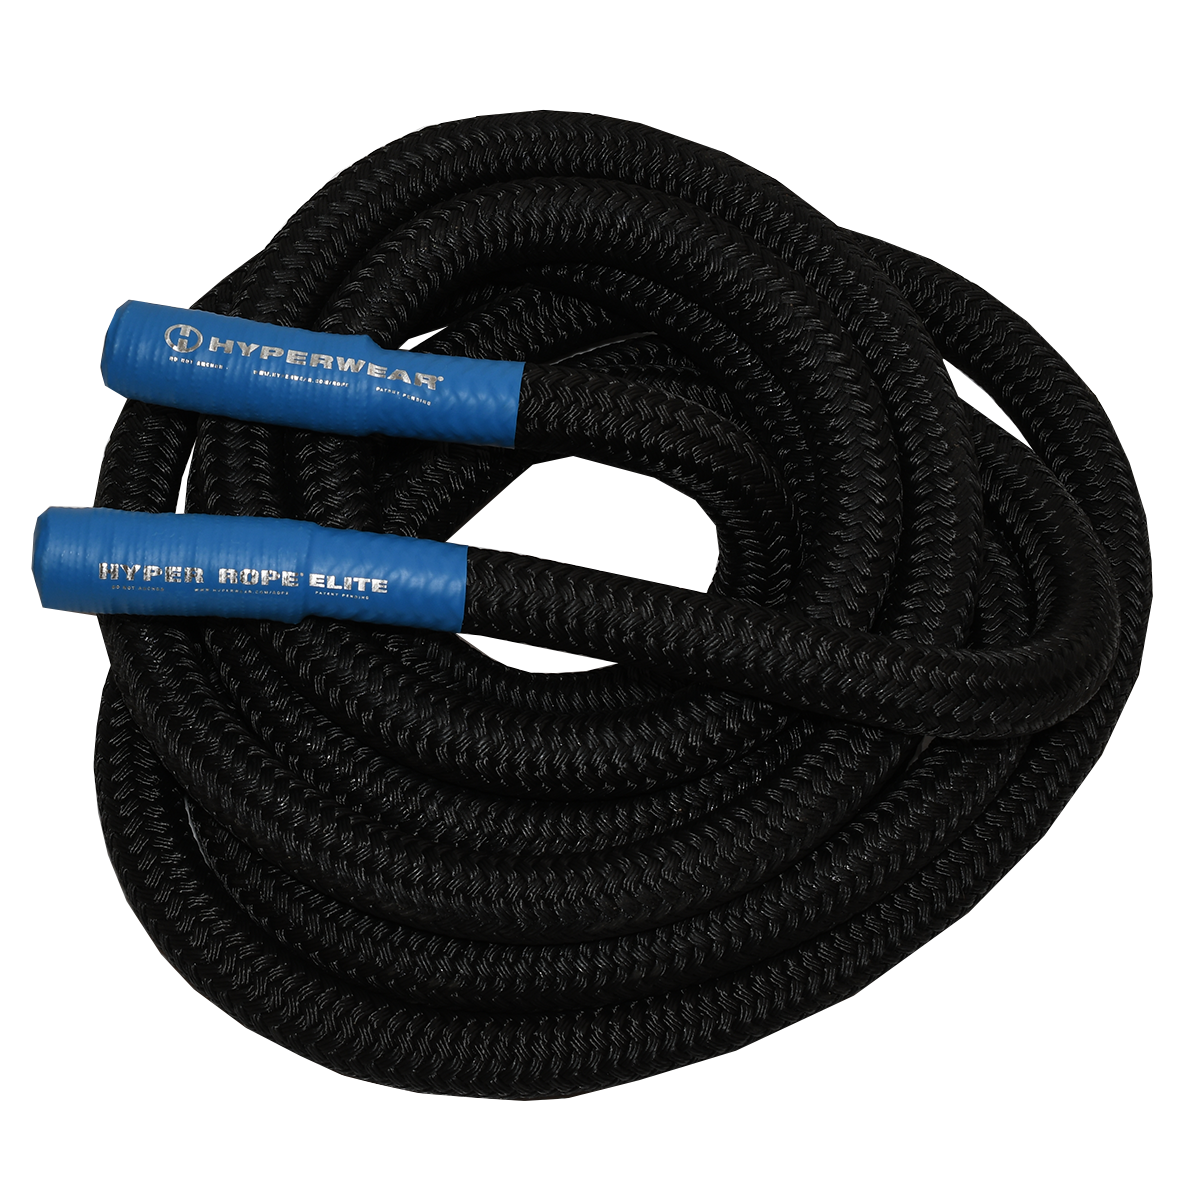 Coiled black hyper rope with blue handles battling rope product image 